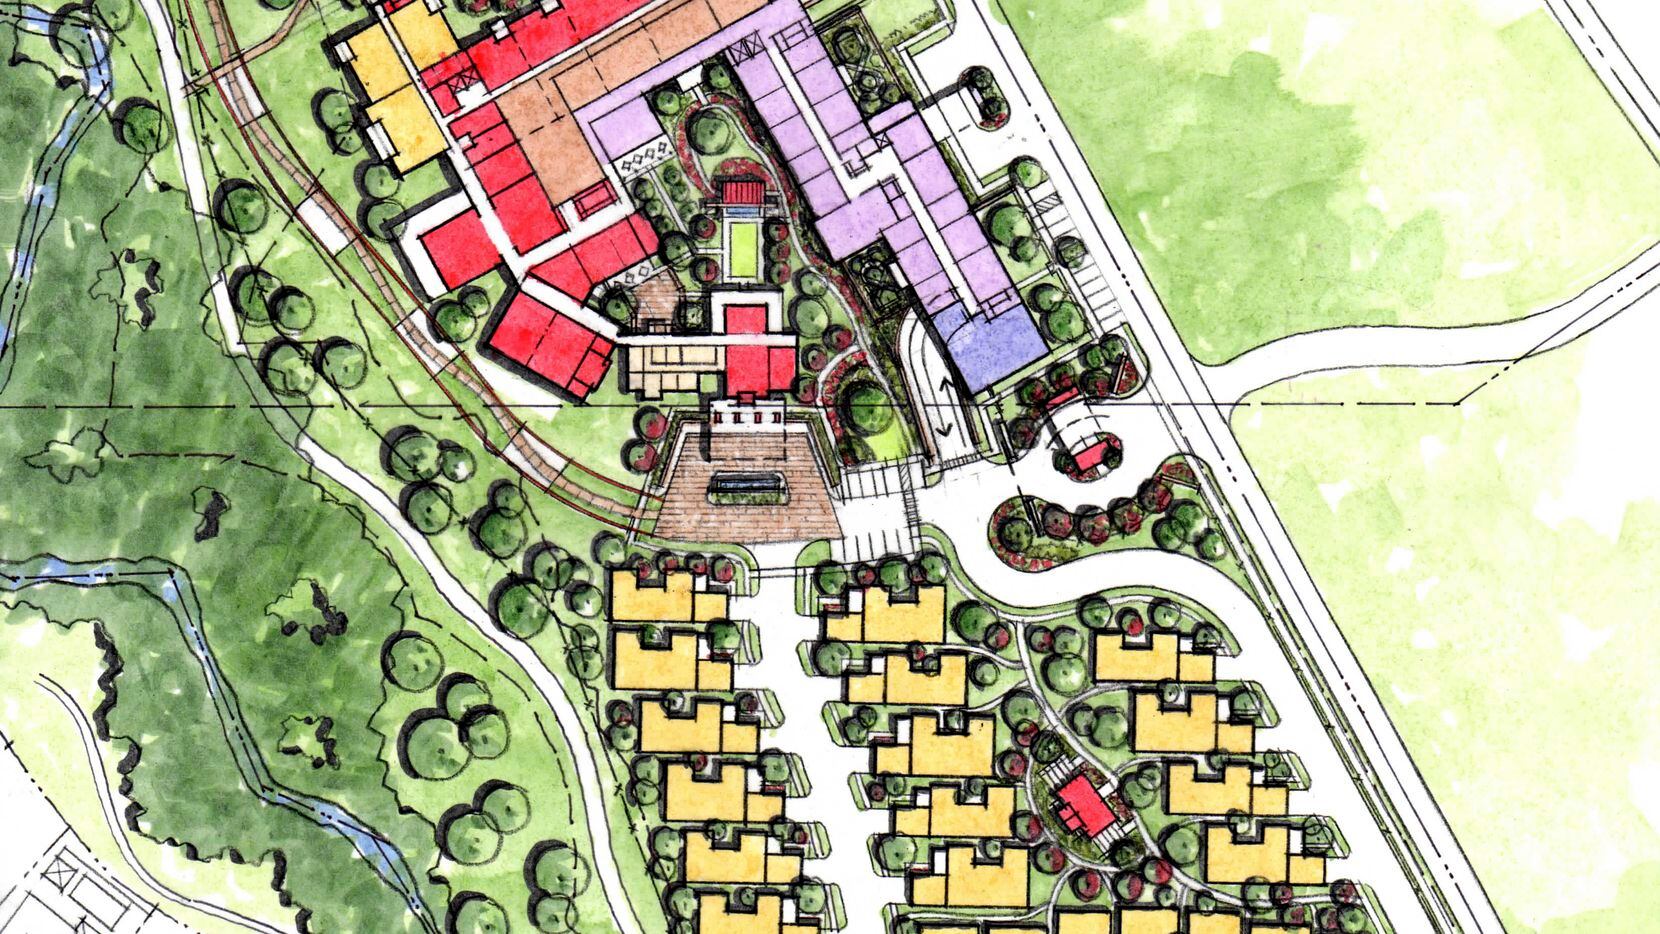 The Outlook at Windhaven residential community would include a variety of seniors housing.